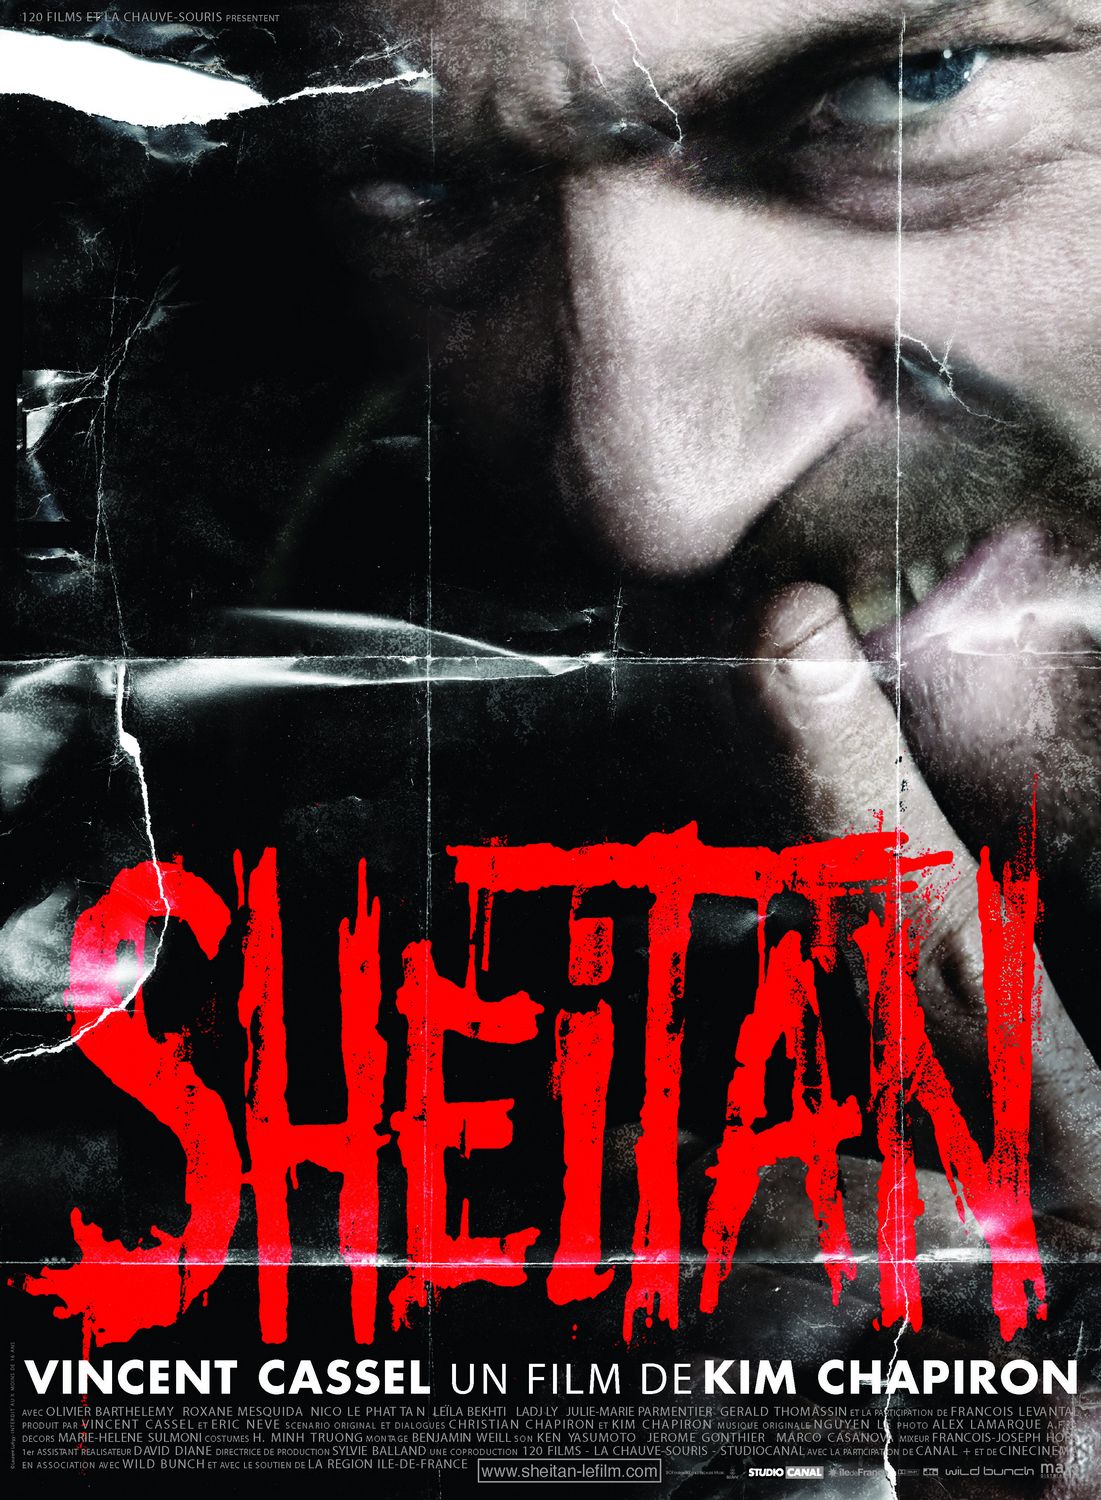 Extra Large Movie Poster Image for Sheitan (#1 of 5)